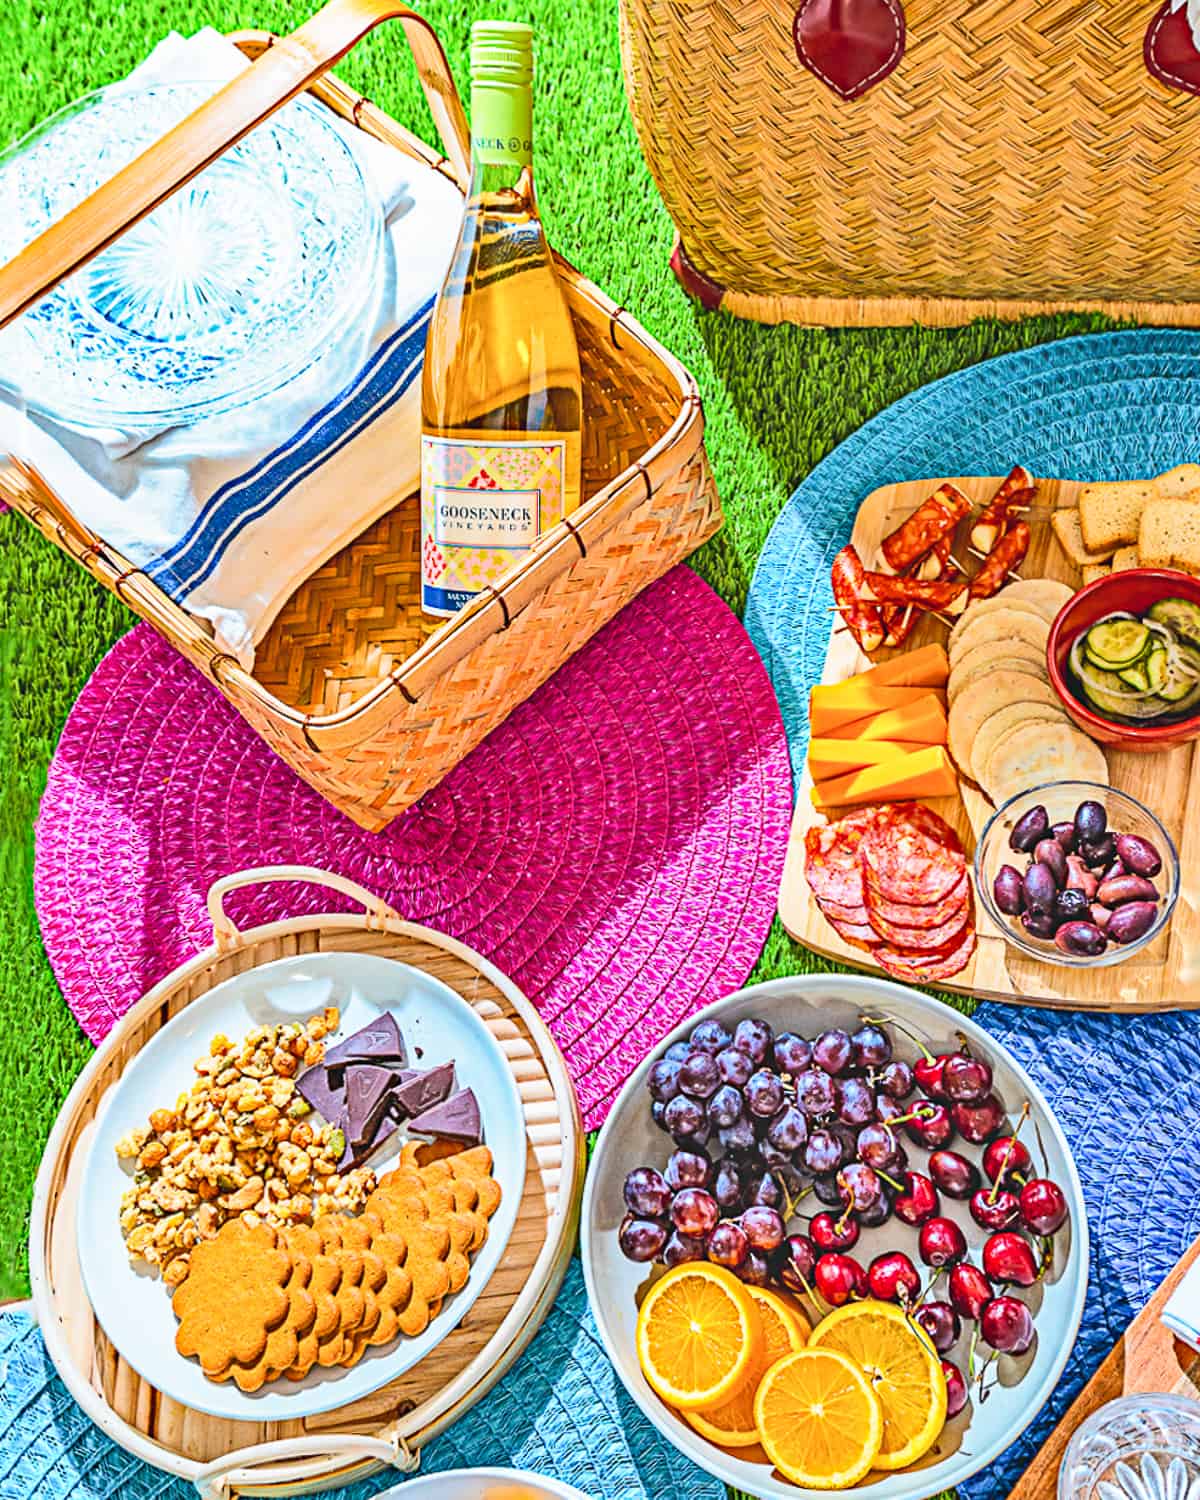 picnic setting with two picnic baskets, bottle of wine, charcuterie board, two plates of fruit and snacks